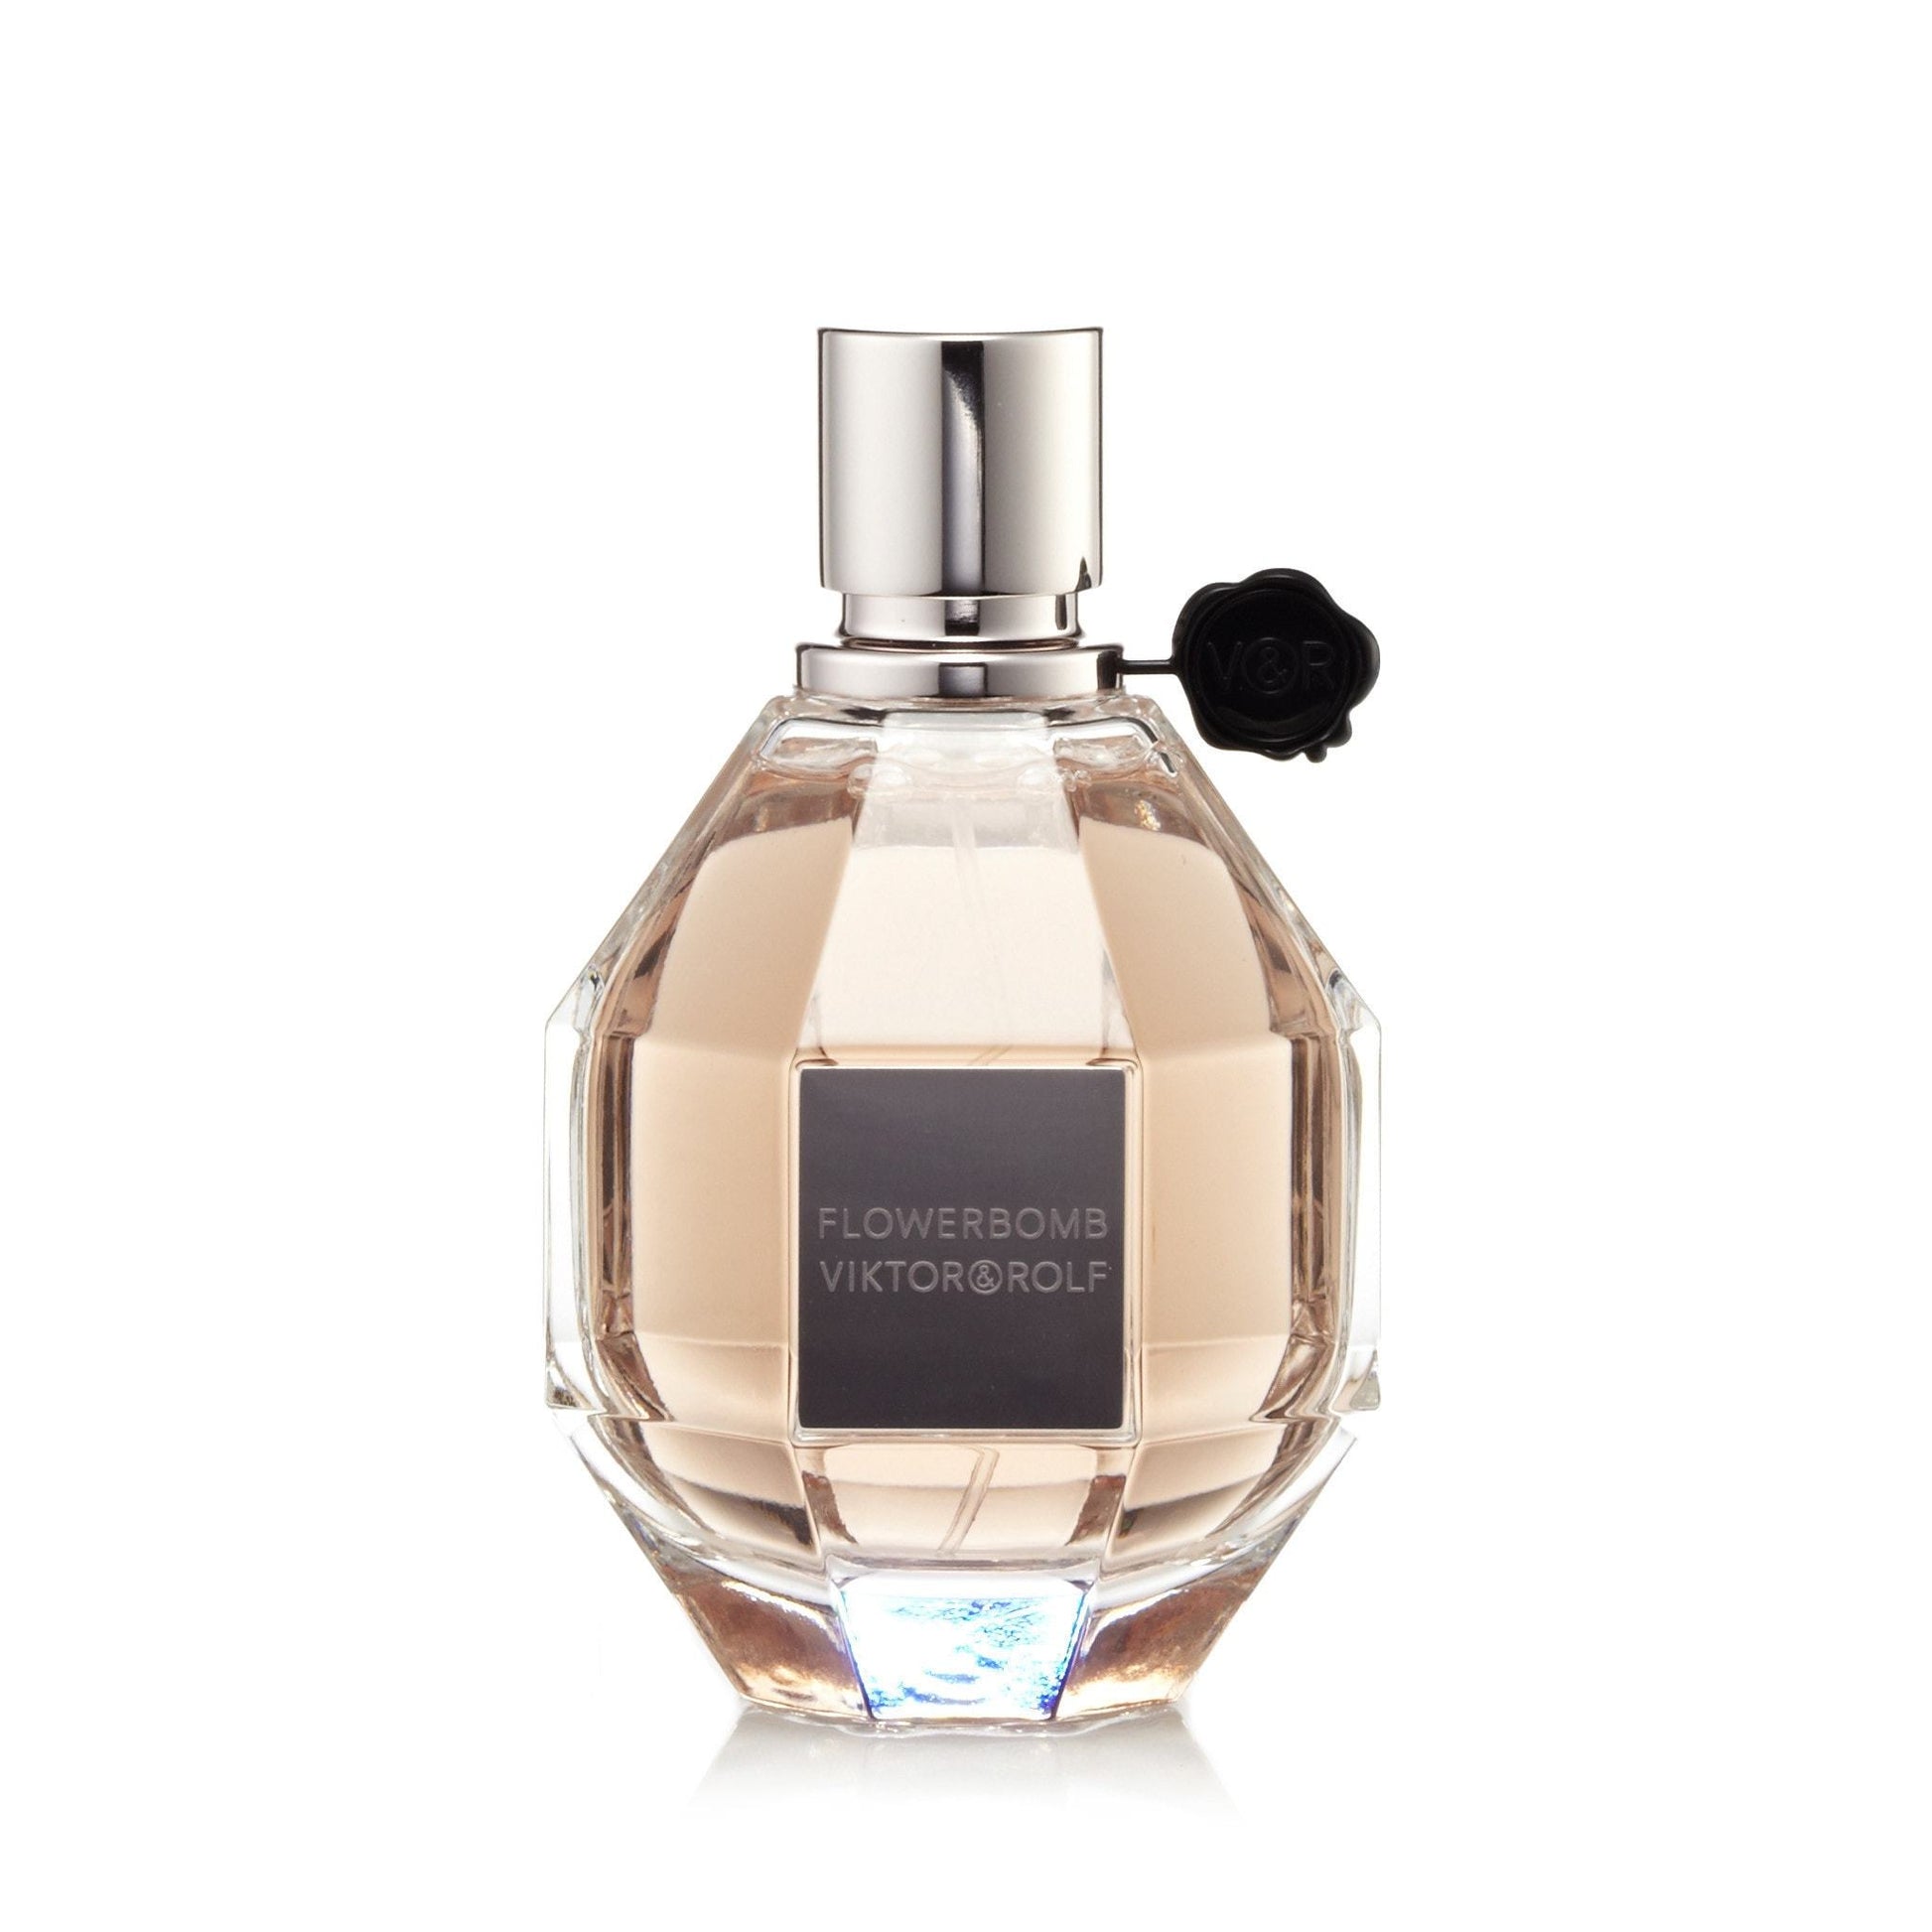 Flowerbomb EDP for Women by Viktor & Rolf, Product image 2